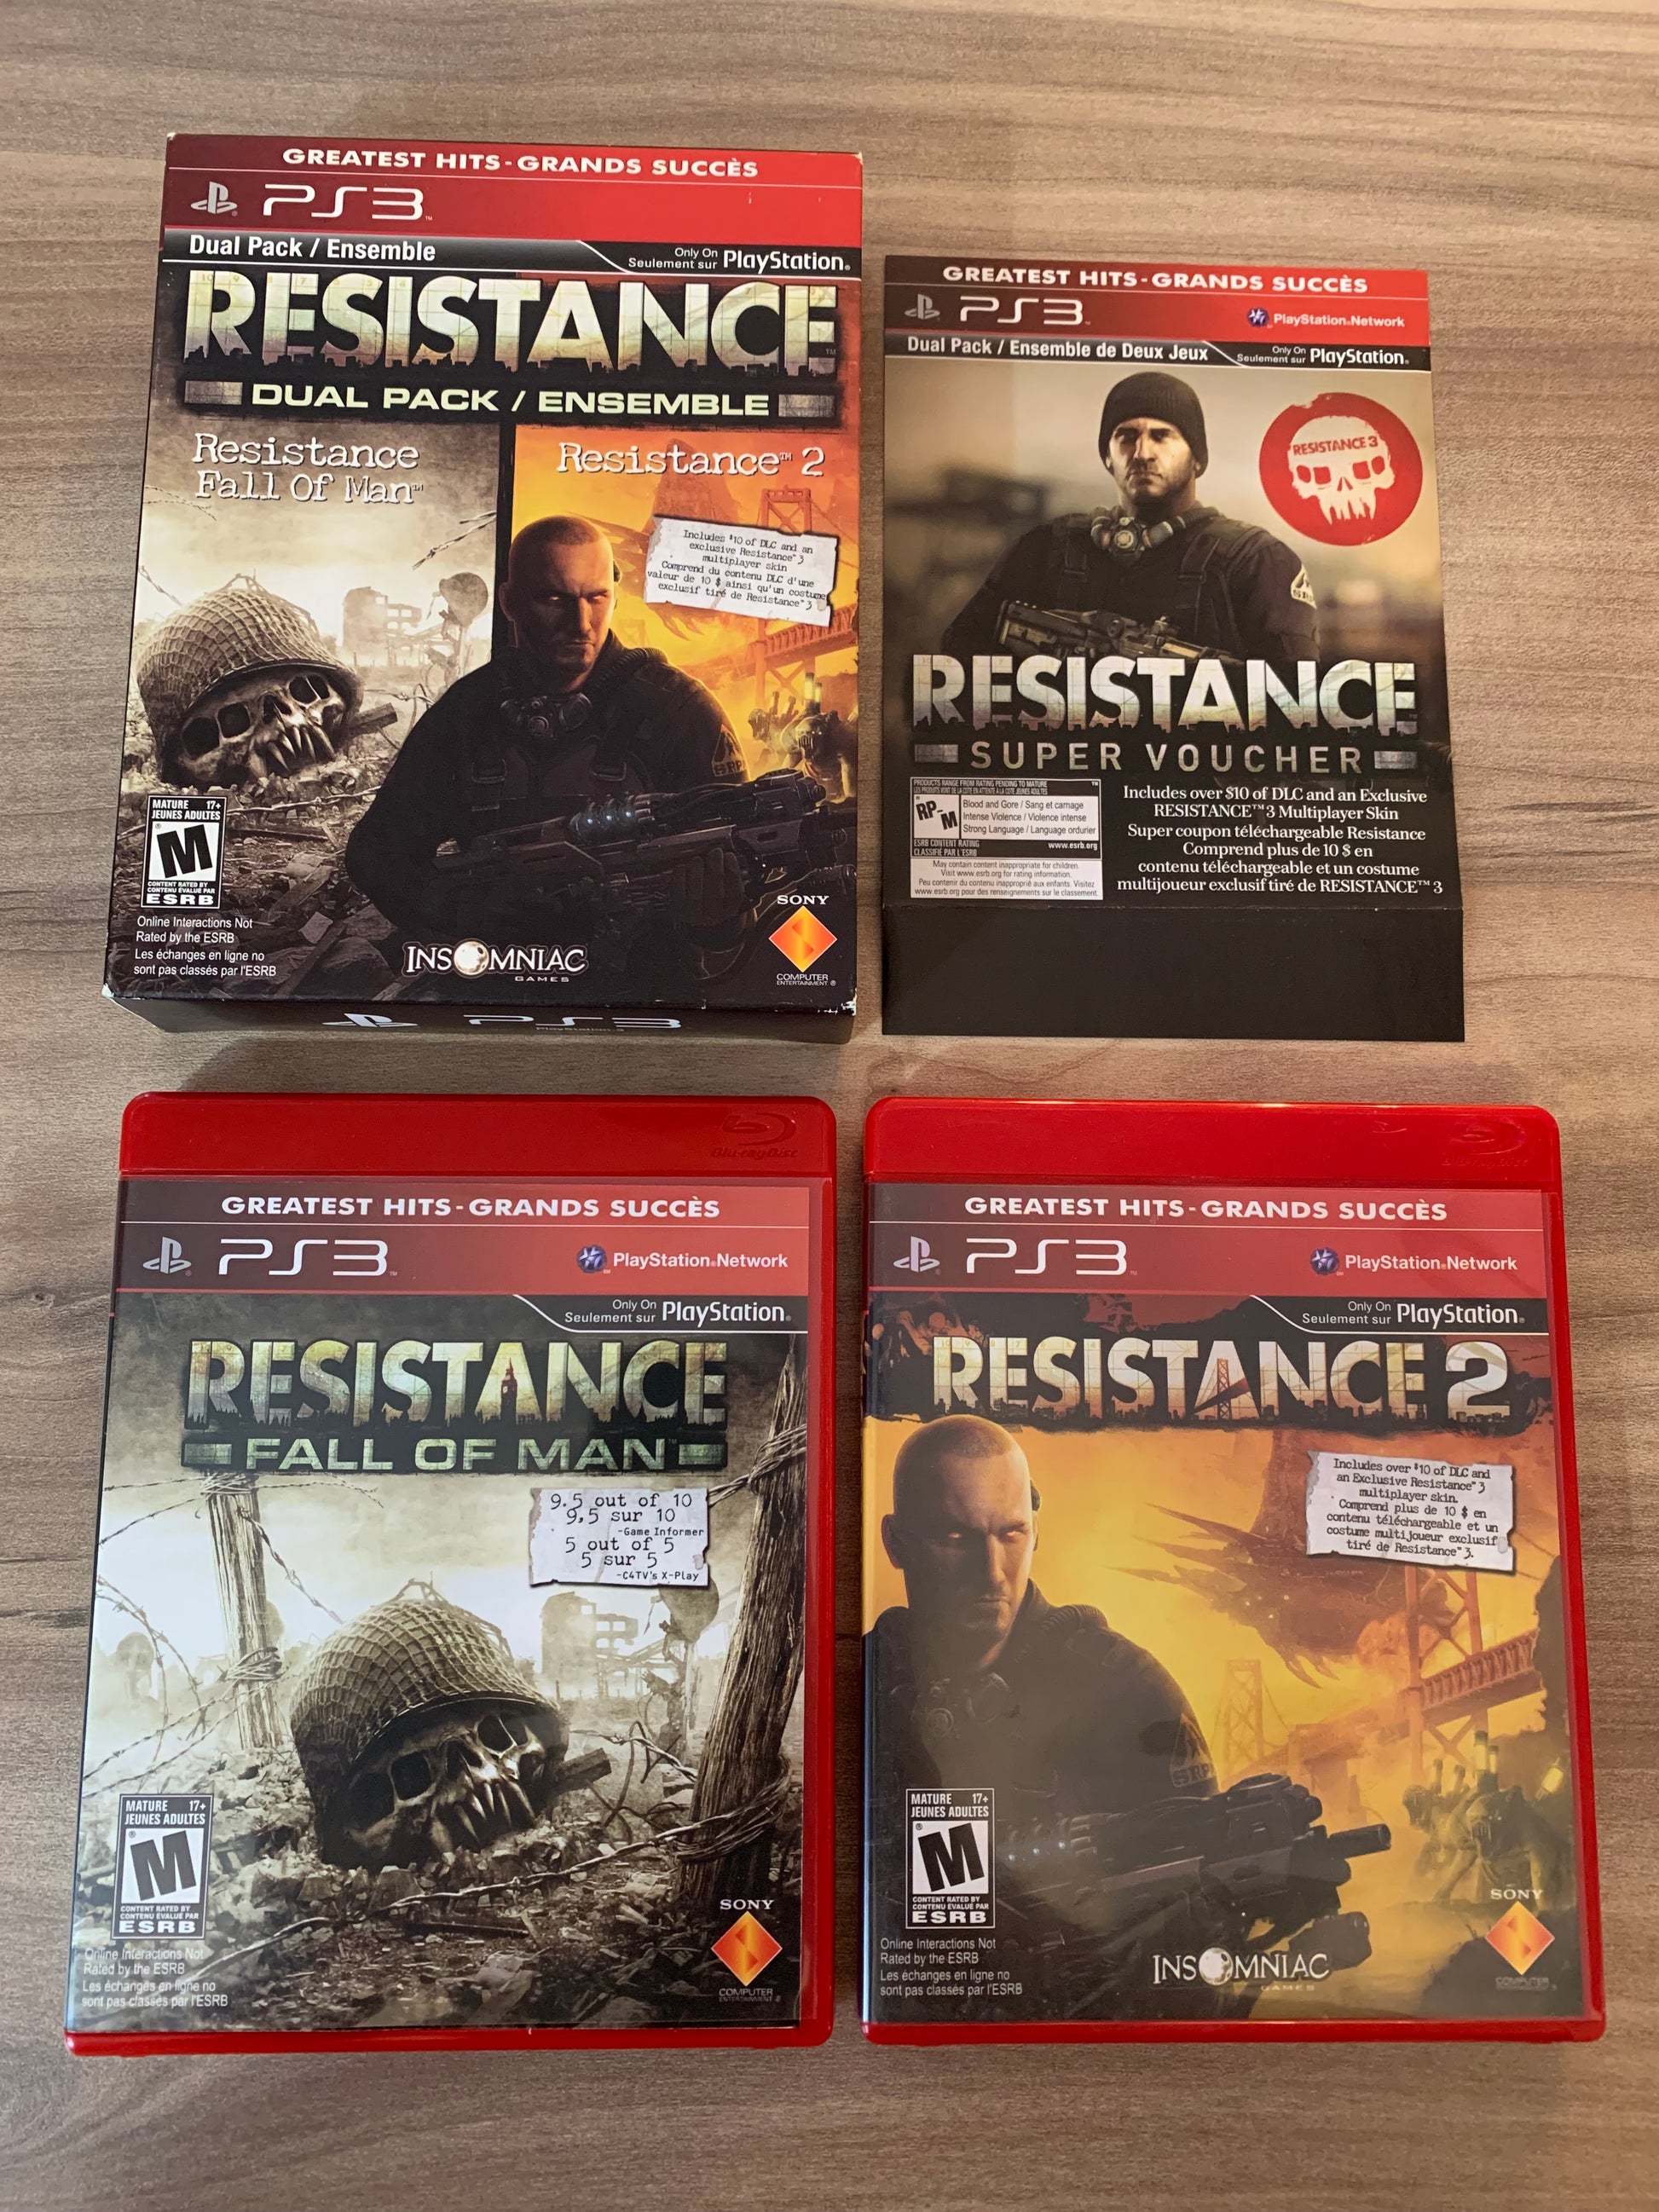 PiXEL-RETRO.COM : SONY PLAYSTATION 3 (PS3) COMPLETE IN BOX CIB MANUAL GAME NTSC RESISTANCE FALL OF MAN & 2 GREATEST HITS DUAL PACK